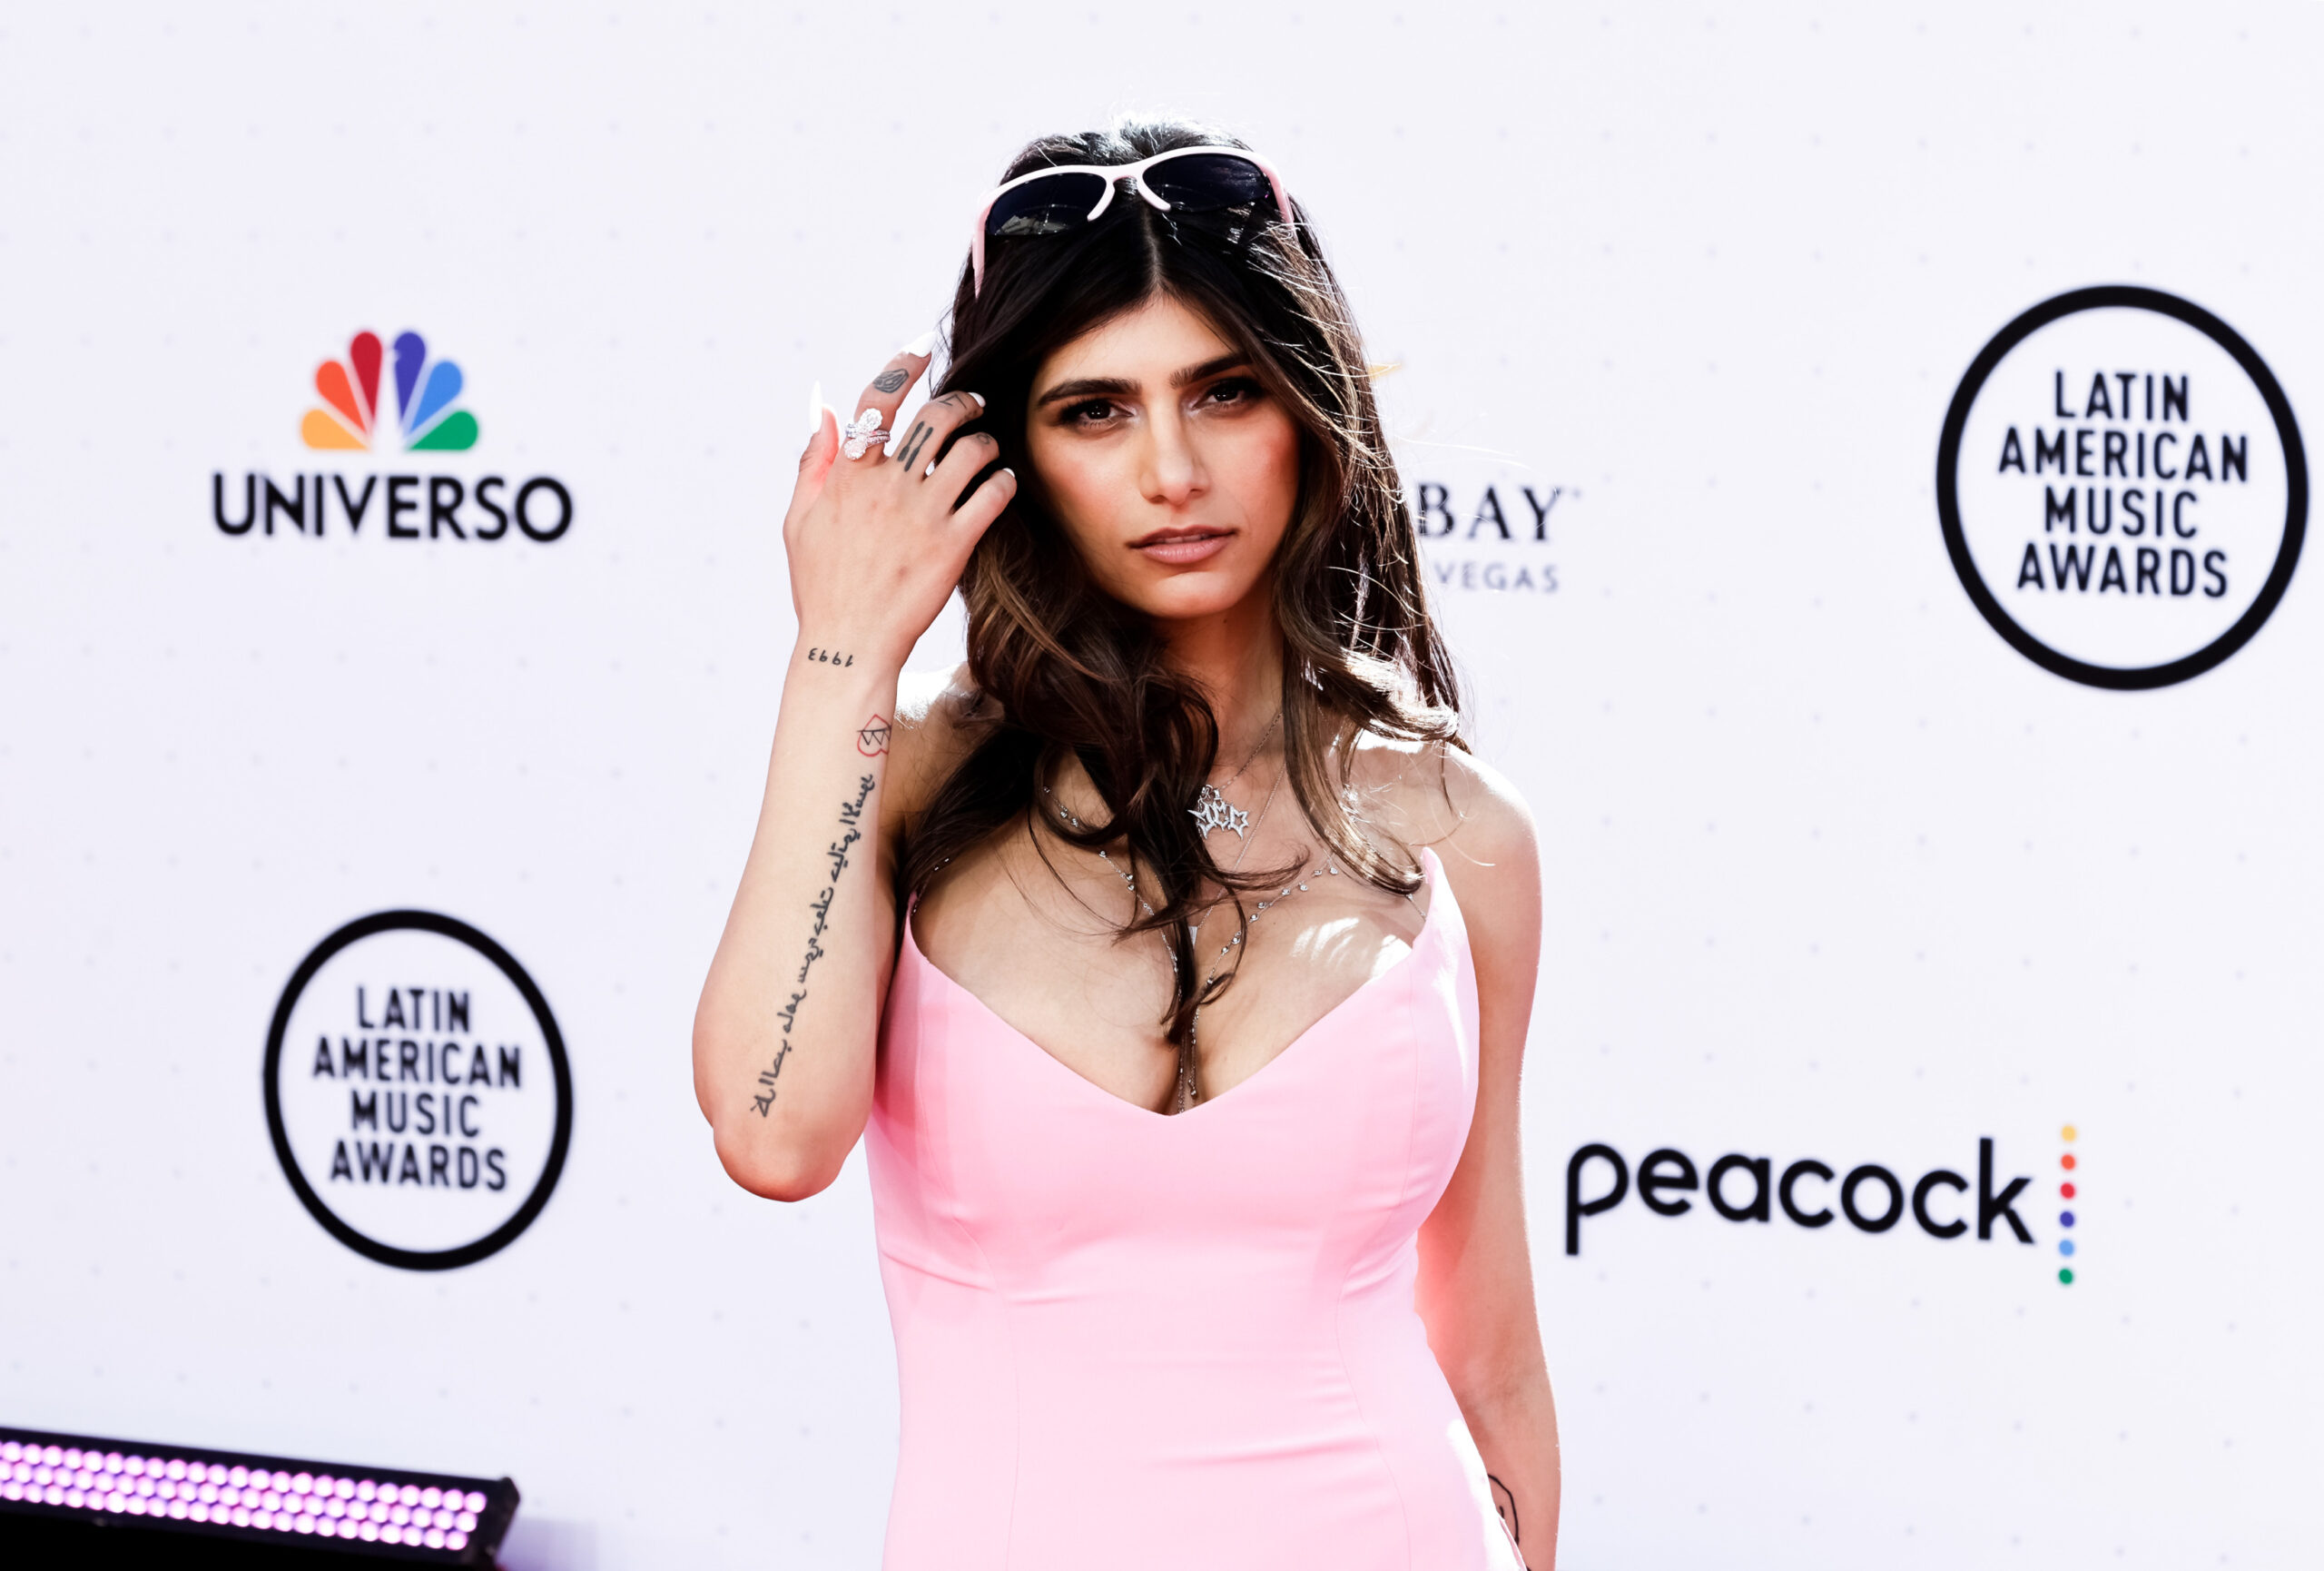 Mia Khalifa Let Go From Playboy After Voicing Support For Palestine